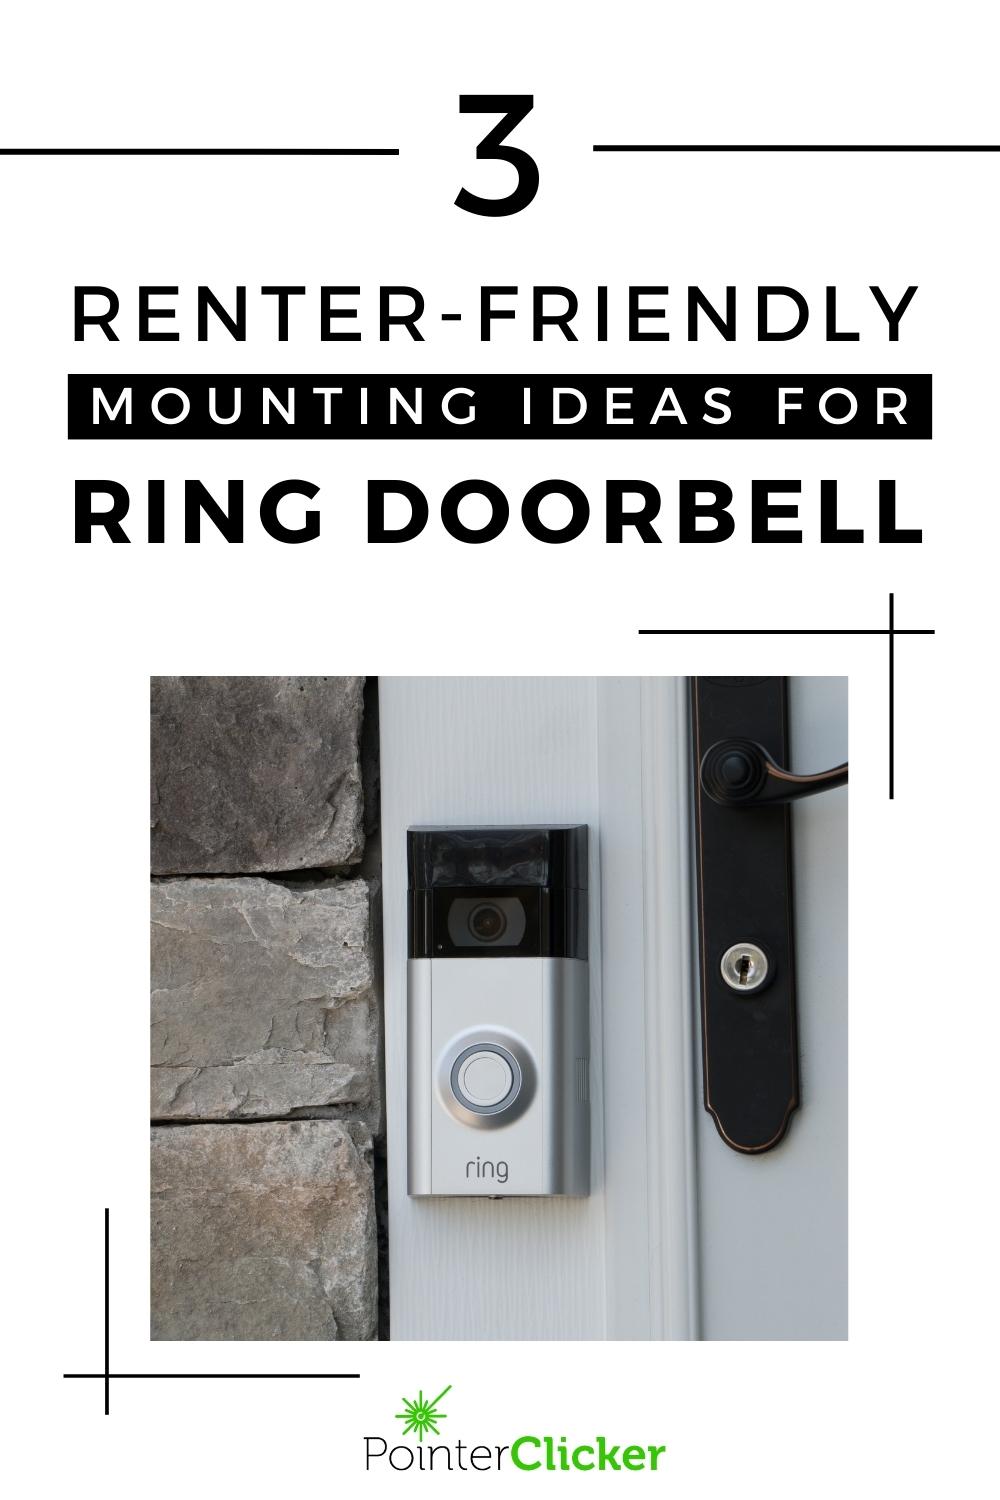 3 renter-friendly mounting ideas for ring doorbell